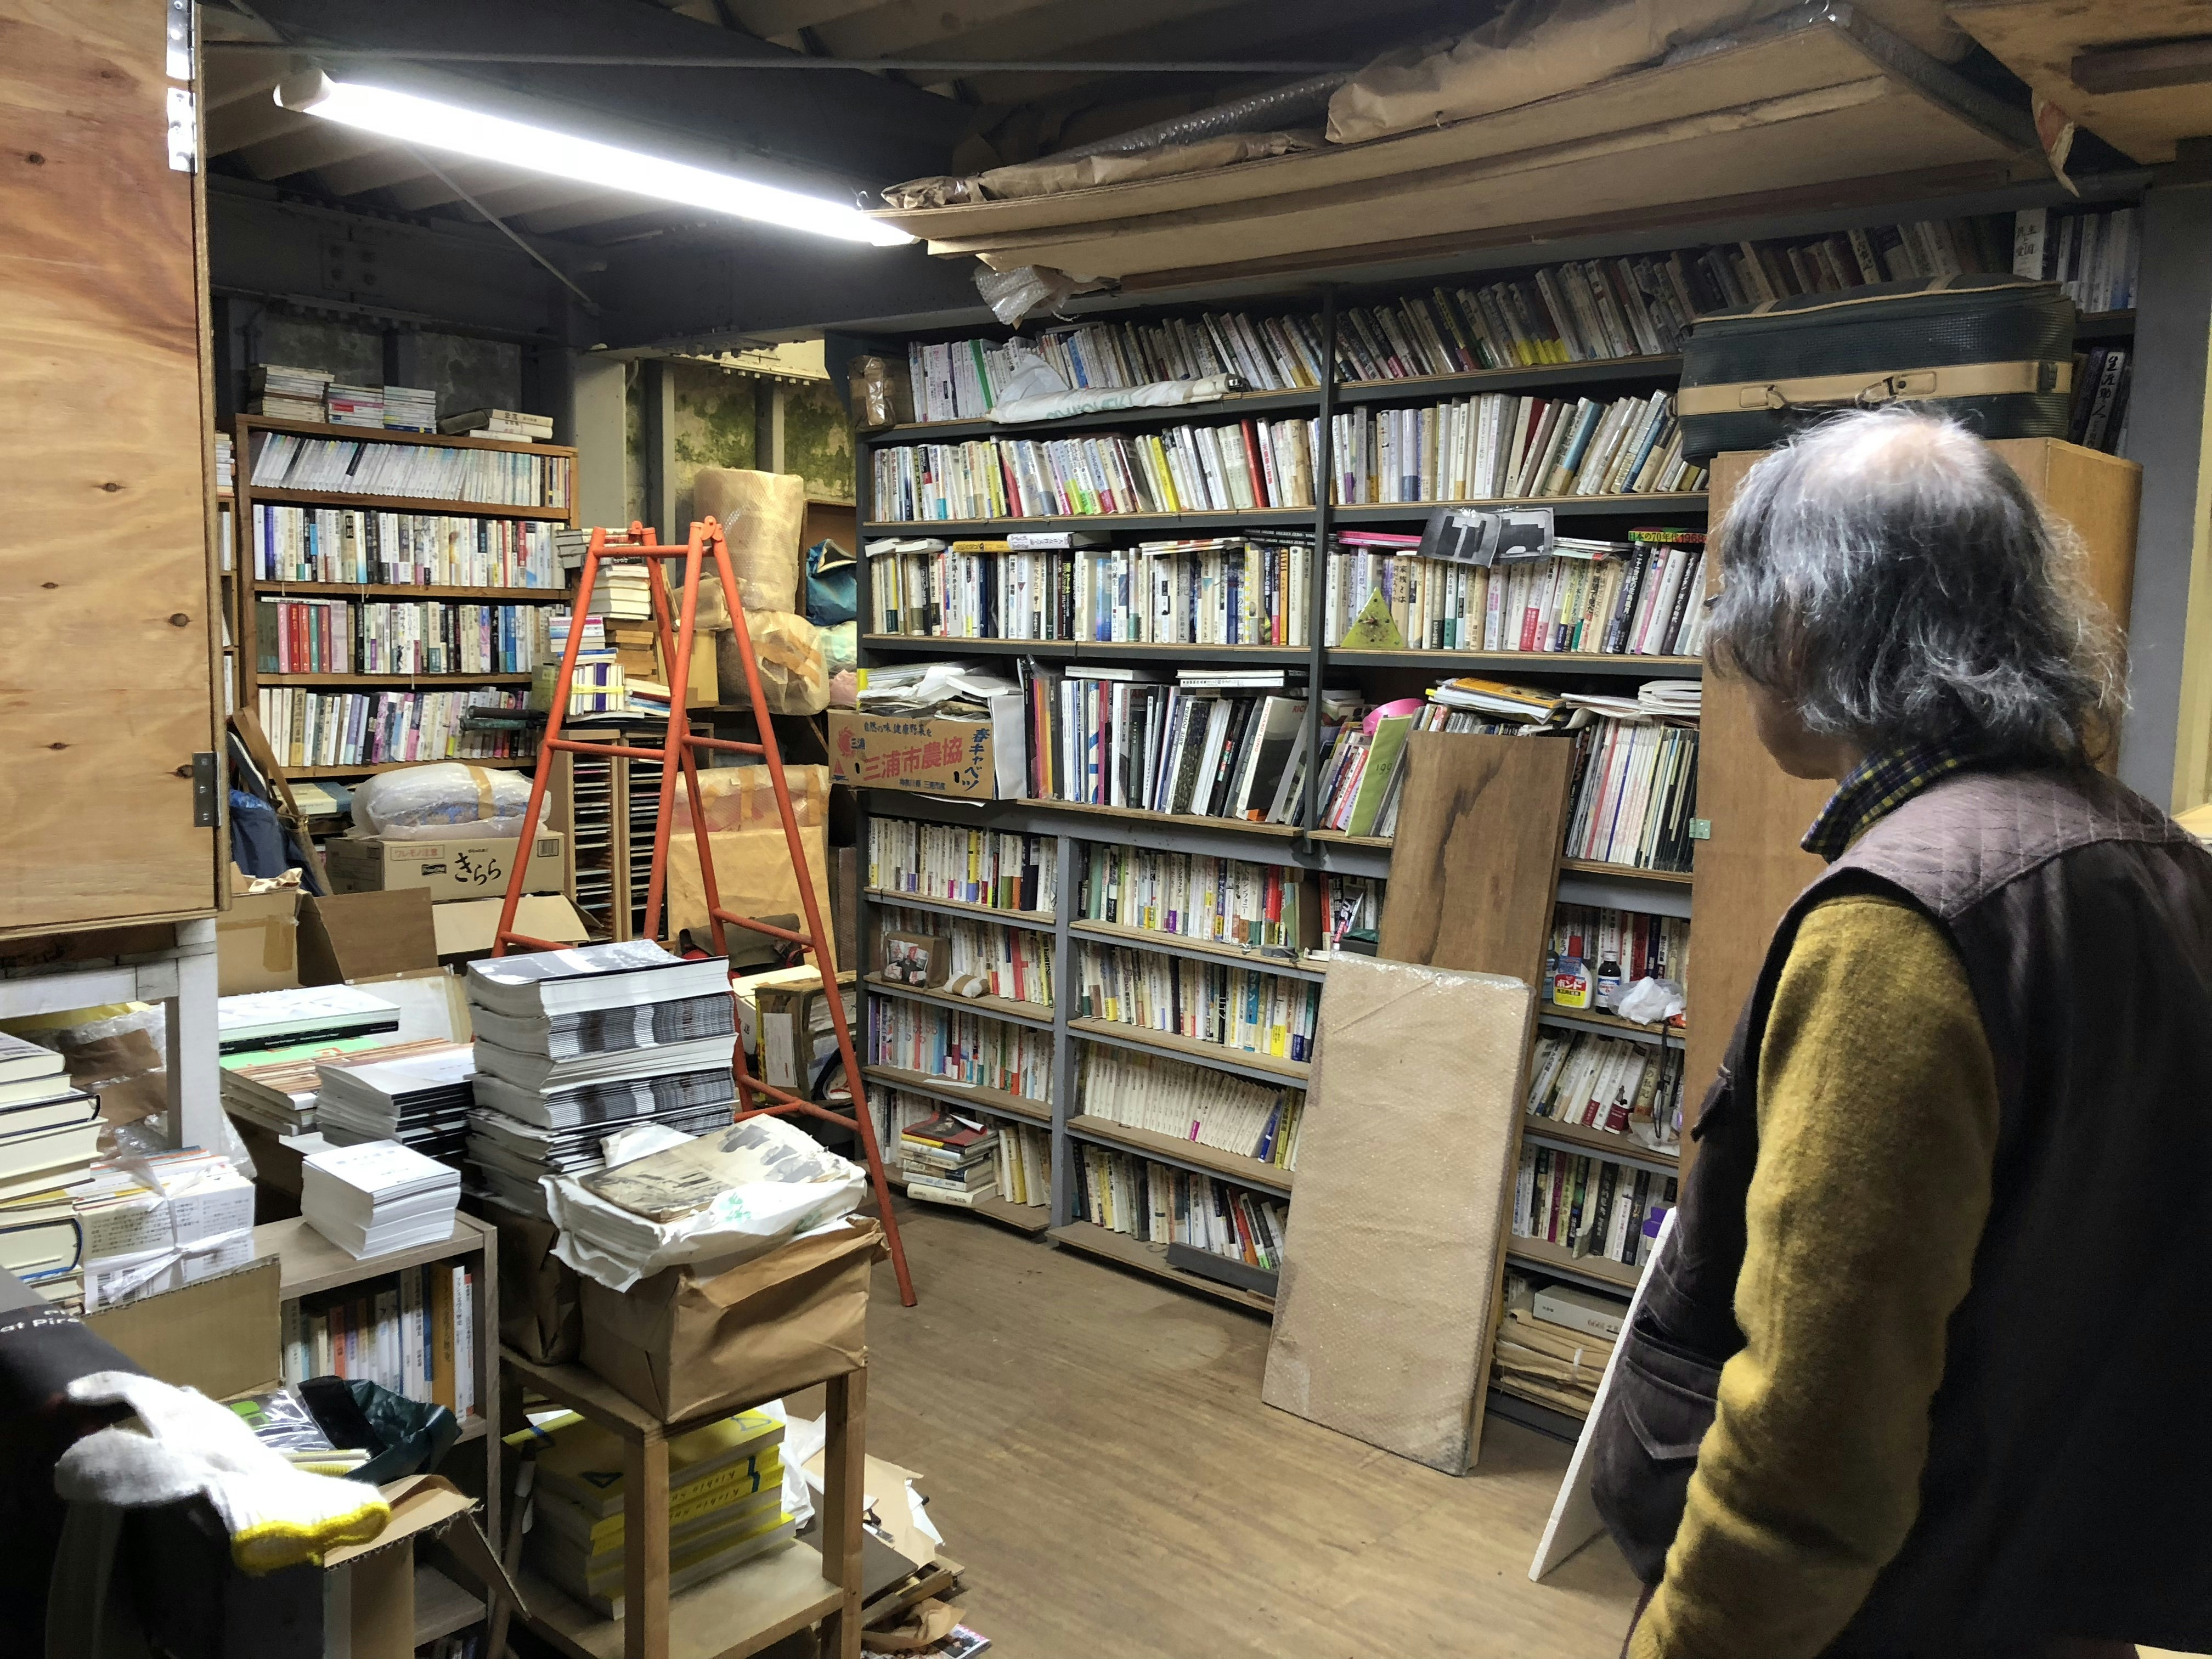 Kishio Suga stands with his back to us, looking at a library of stacked books, magazines and newspapers in boxes, next to planks of wood, wrapped packages and an orange stepladder.